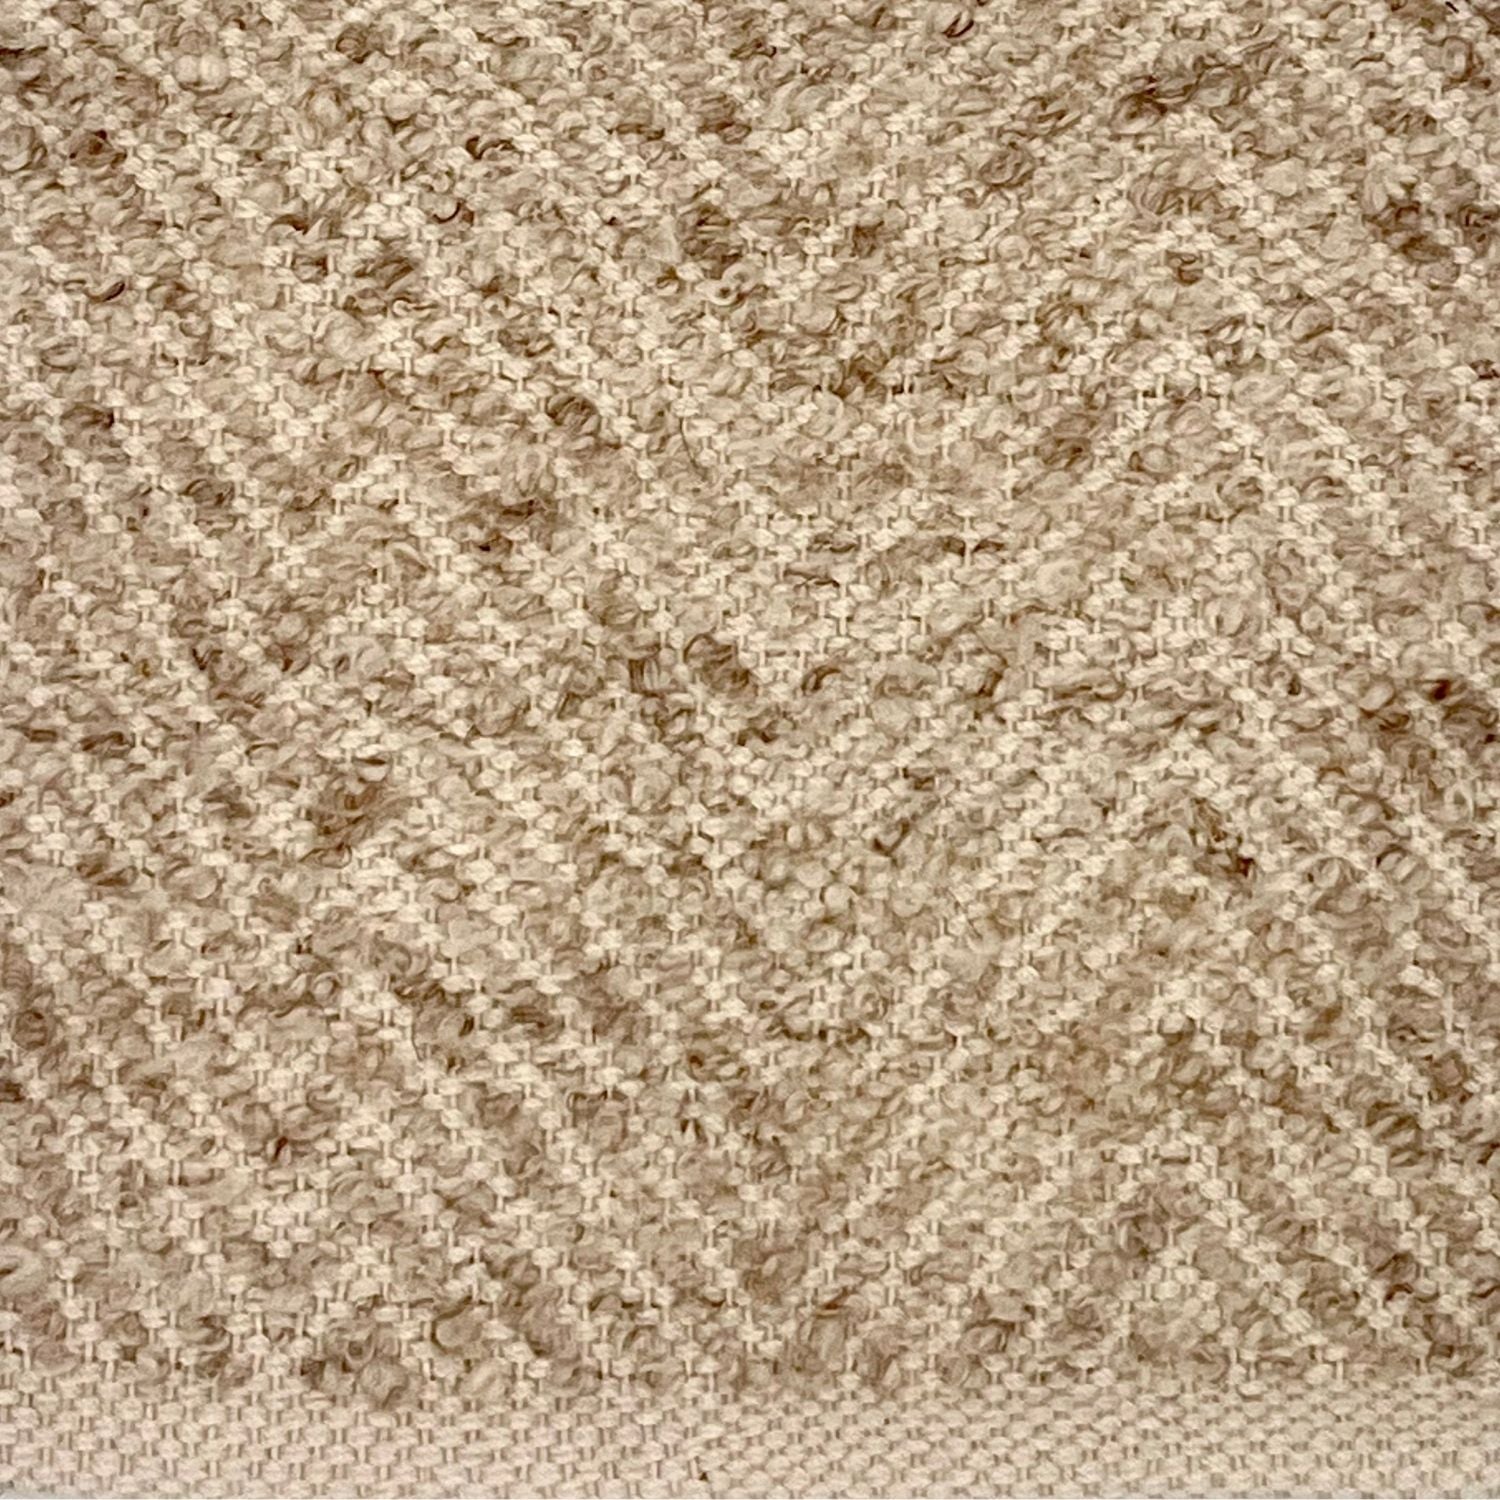 Detail of a flatwoven rug in taupe with a textural chevron pattern